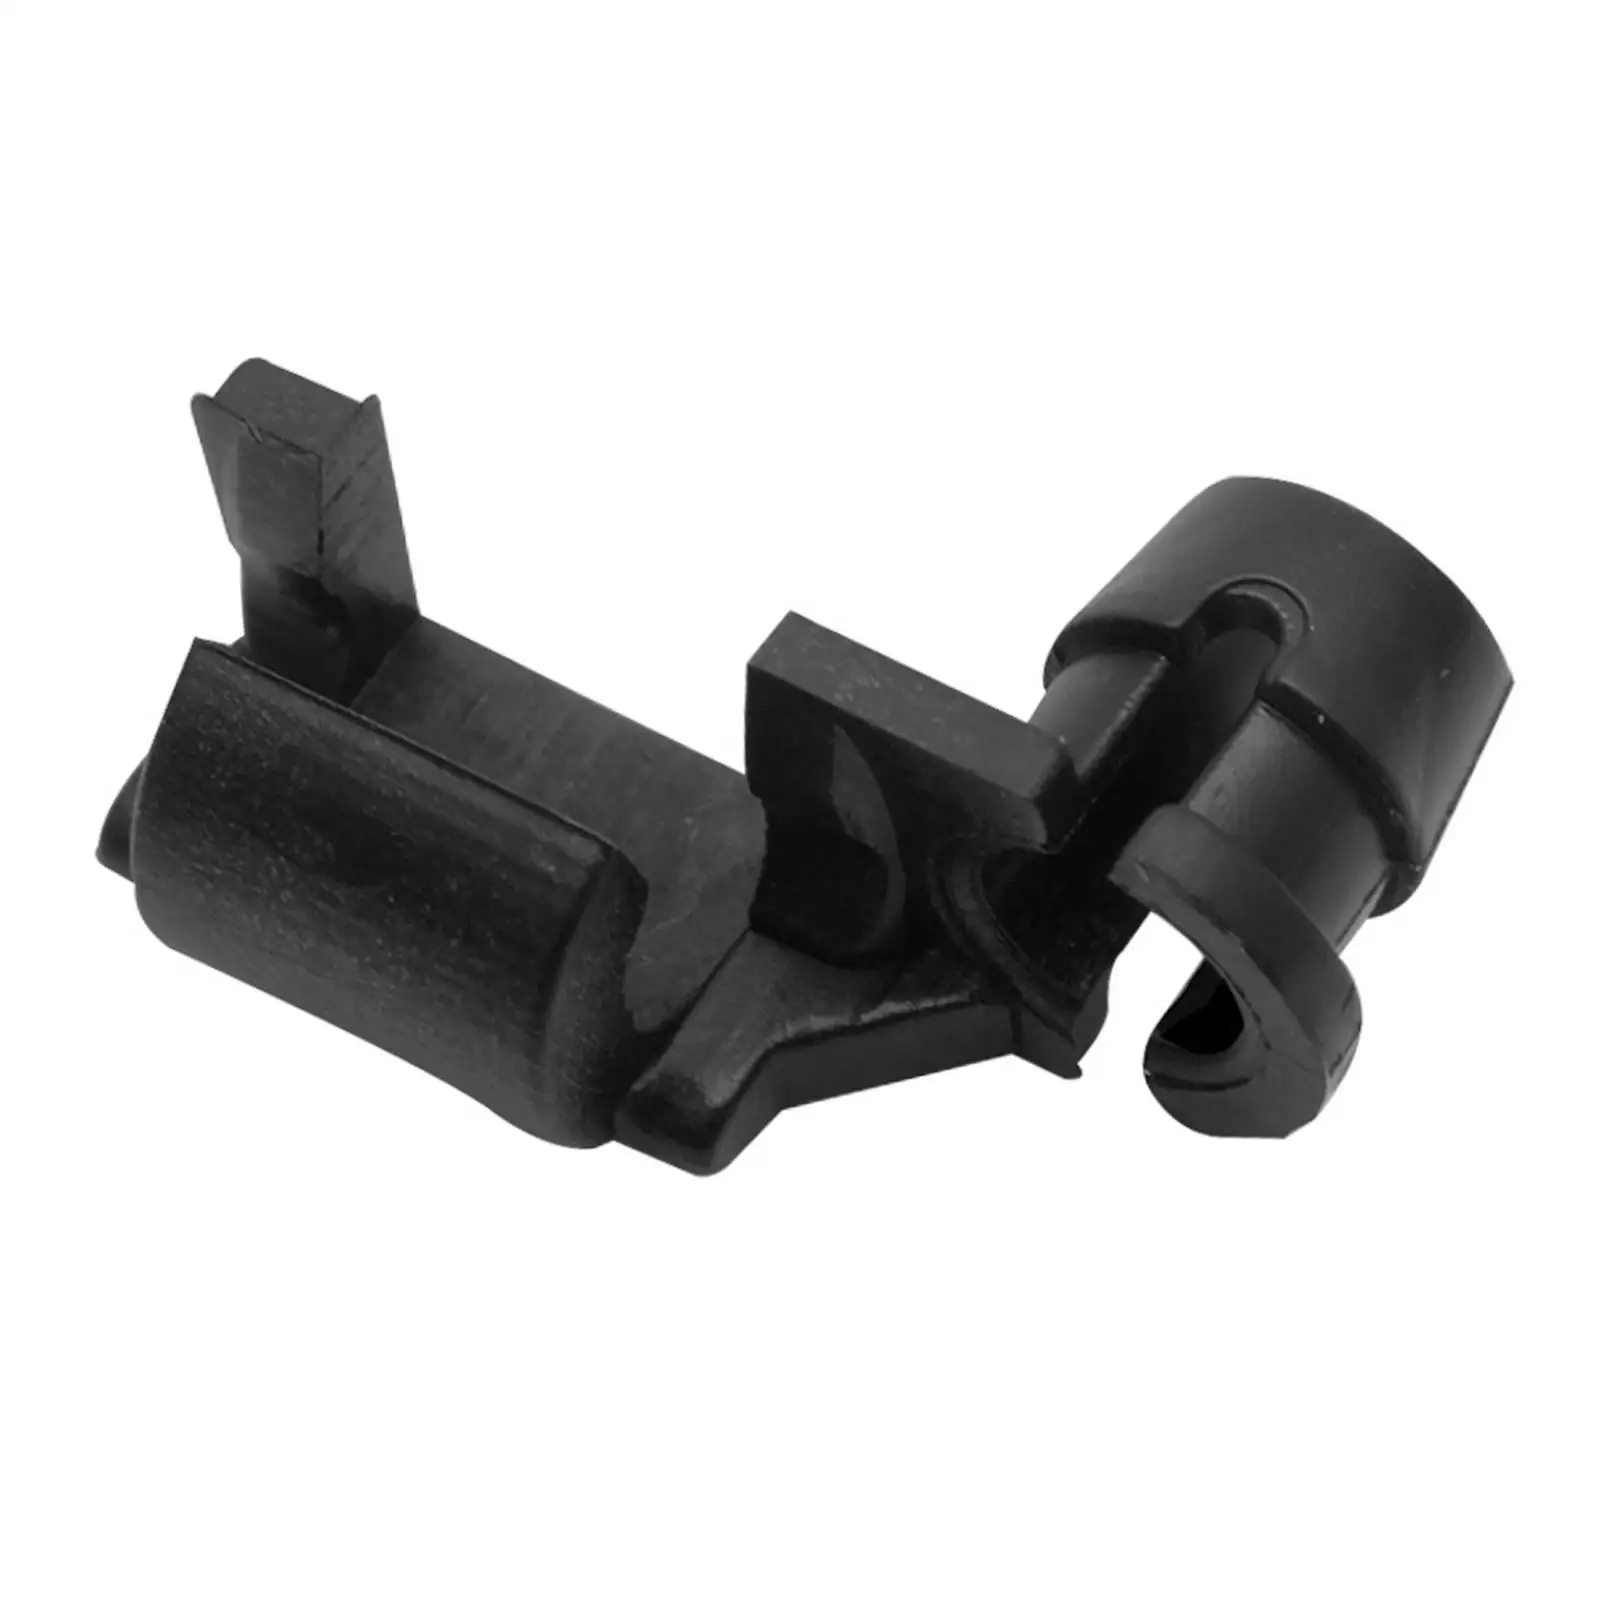 Boat Joint Link 6R5-41237-00 for Yamaha Outboard Engine Convenient Installation Black Professional Boat Repairing Accessory